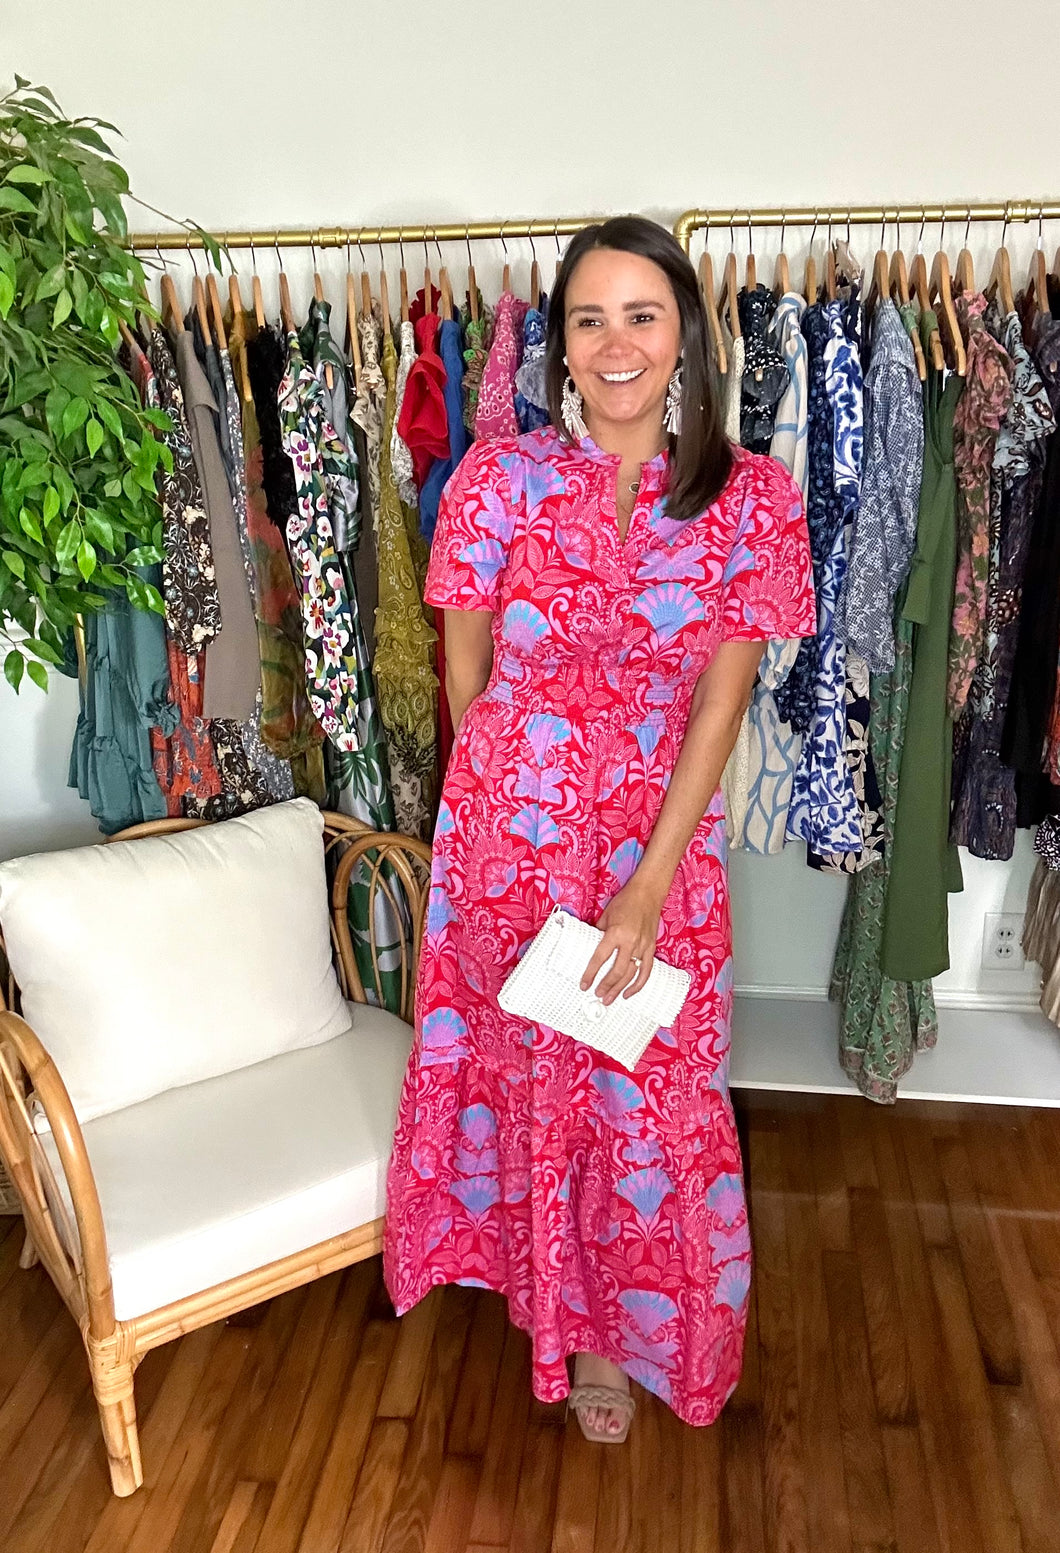 Radiant floral Belraj maxi dress. Coral and light blue tropical printed maxi dress with fly away sleeves, split neckline, smocked empire waistline and tiered skirt with pockets. Cotton poplin.  True to size, wearing size x-small.  Good for bump, post bump or no bump!